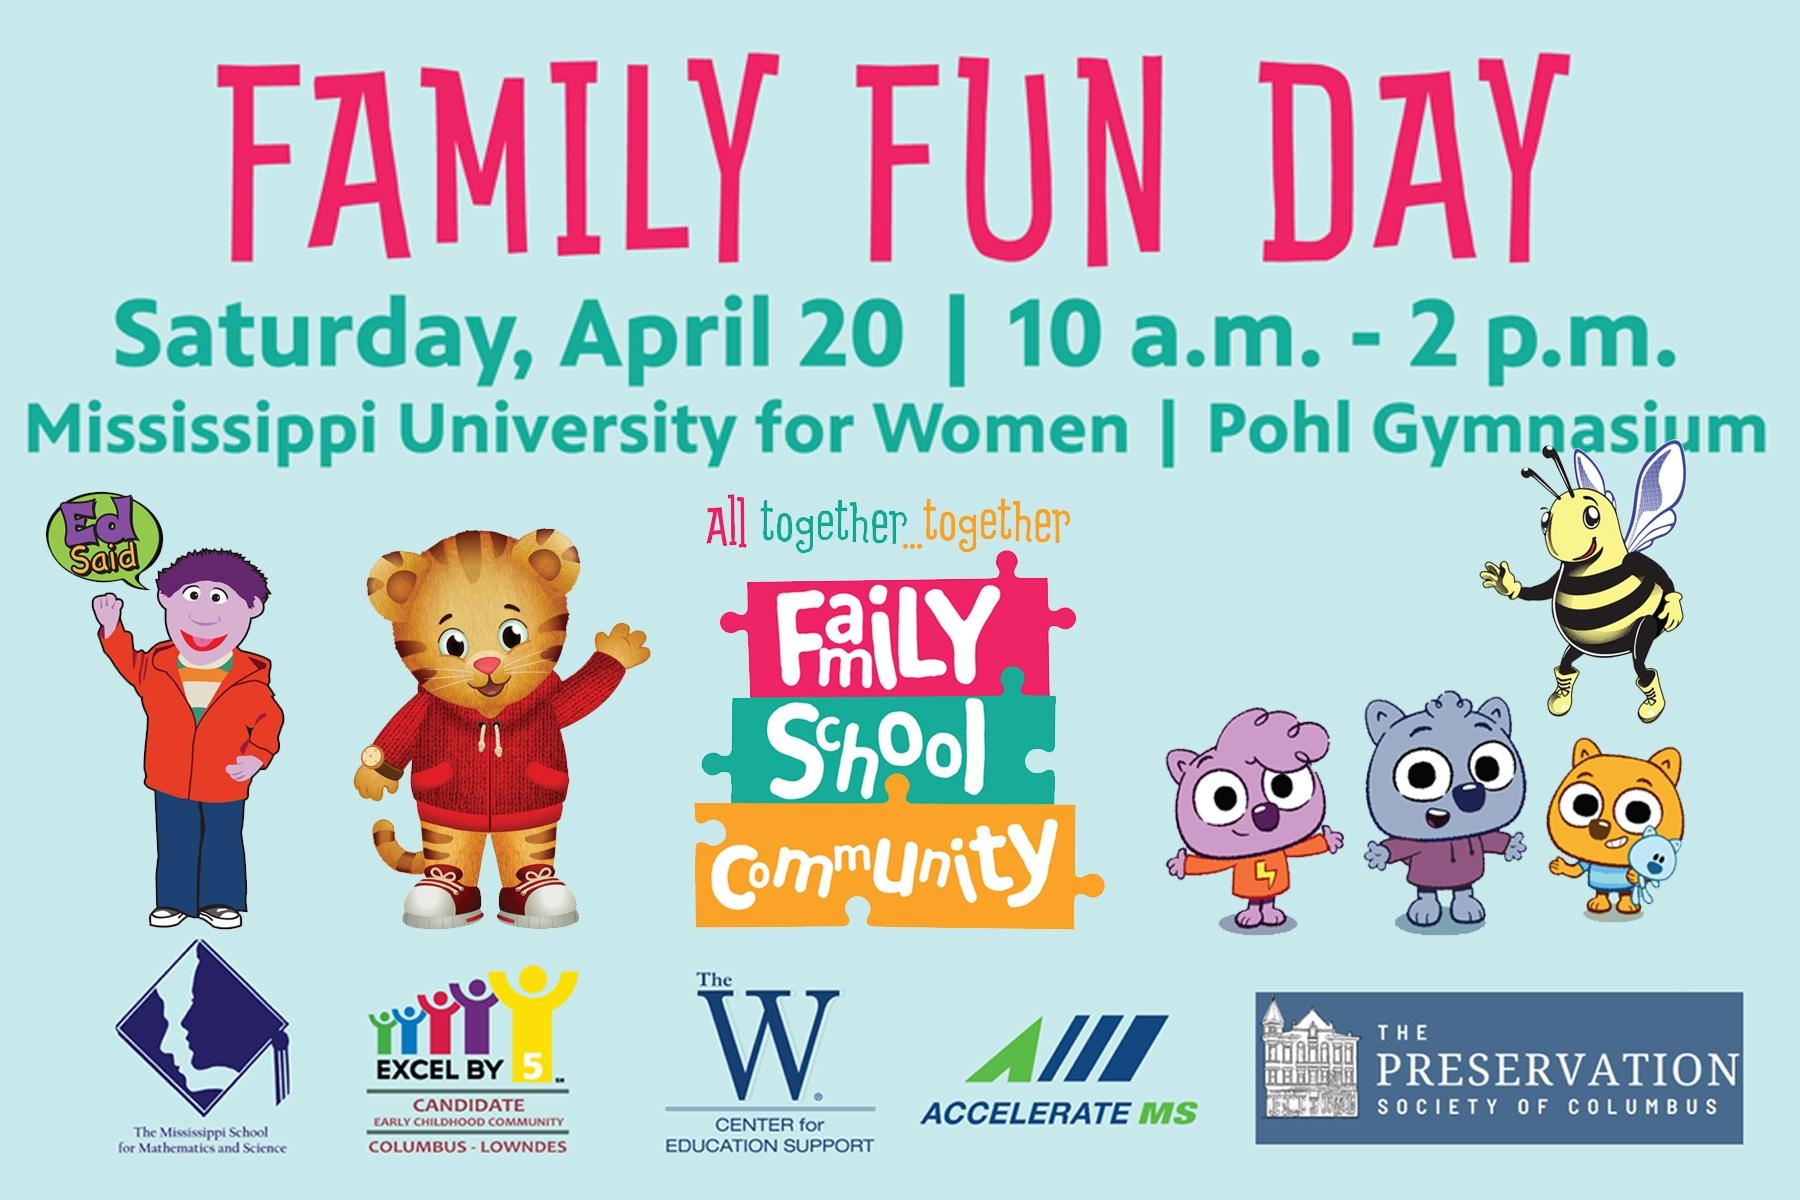 Family Fun Day - Saturday April 20 from 10 am to 2 pm at the Mississippi University for Women